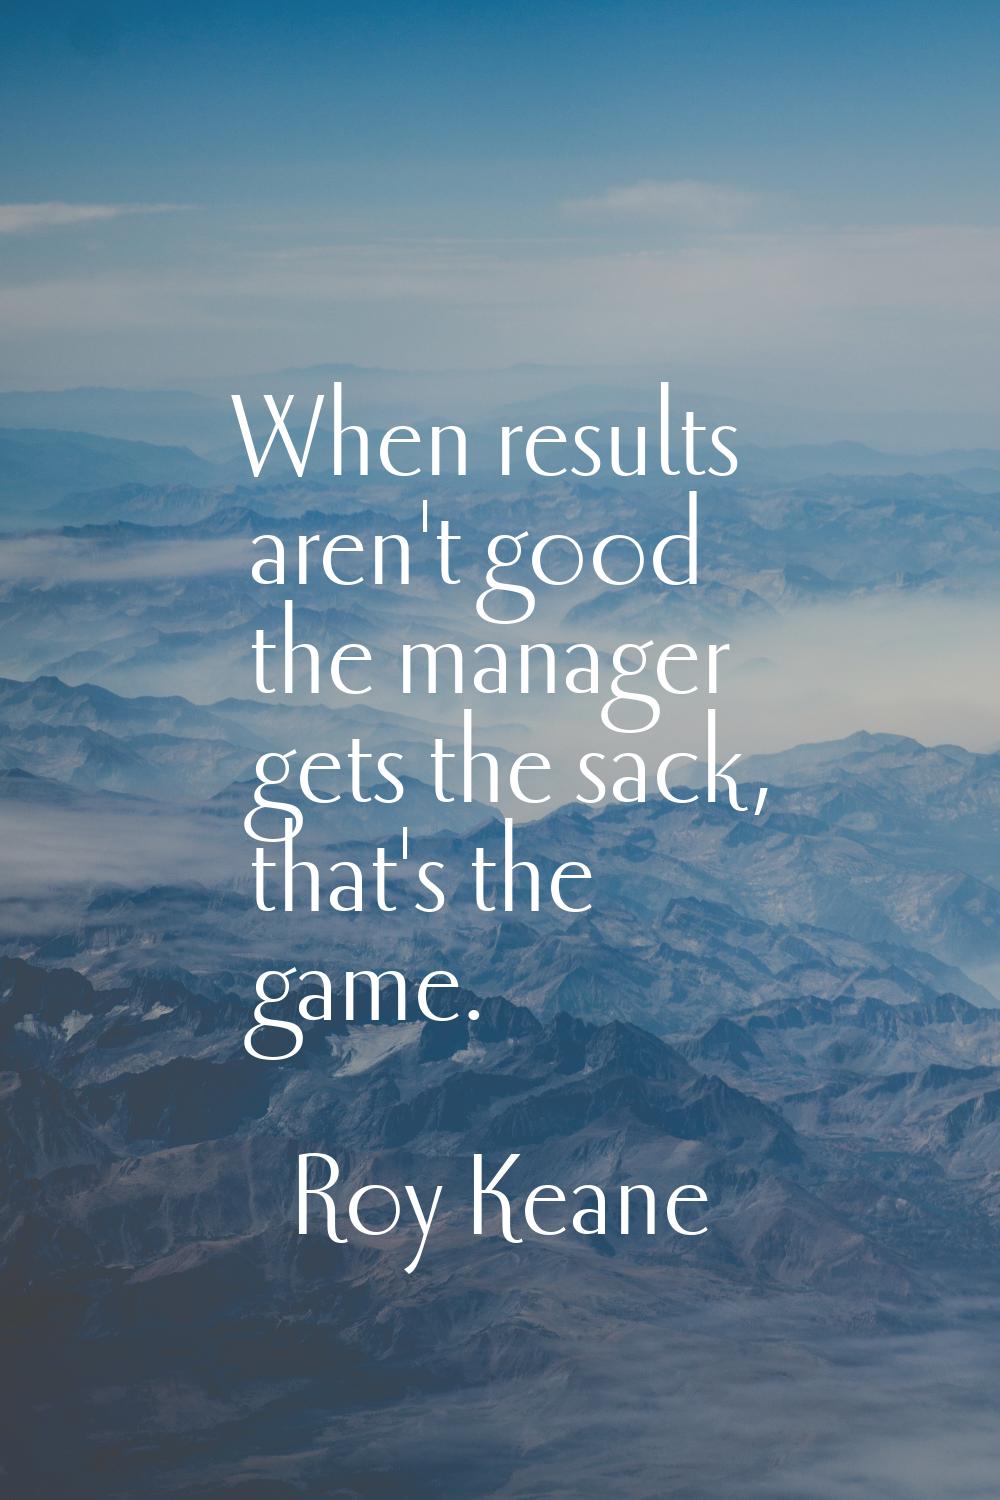 When results aren't good the manager gets the sack, that's the game.